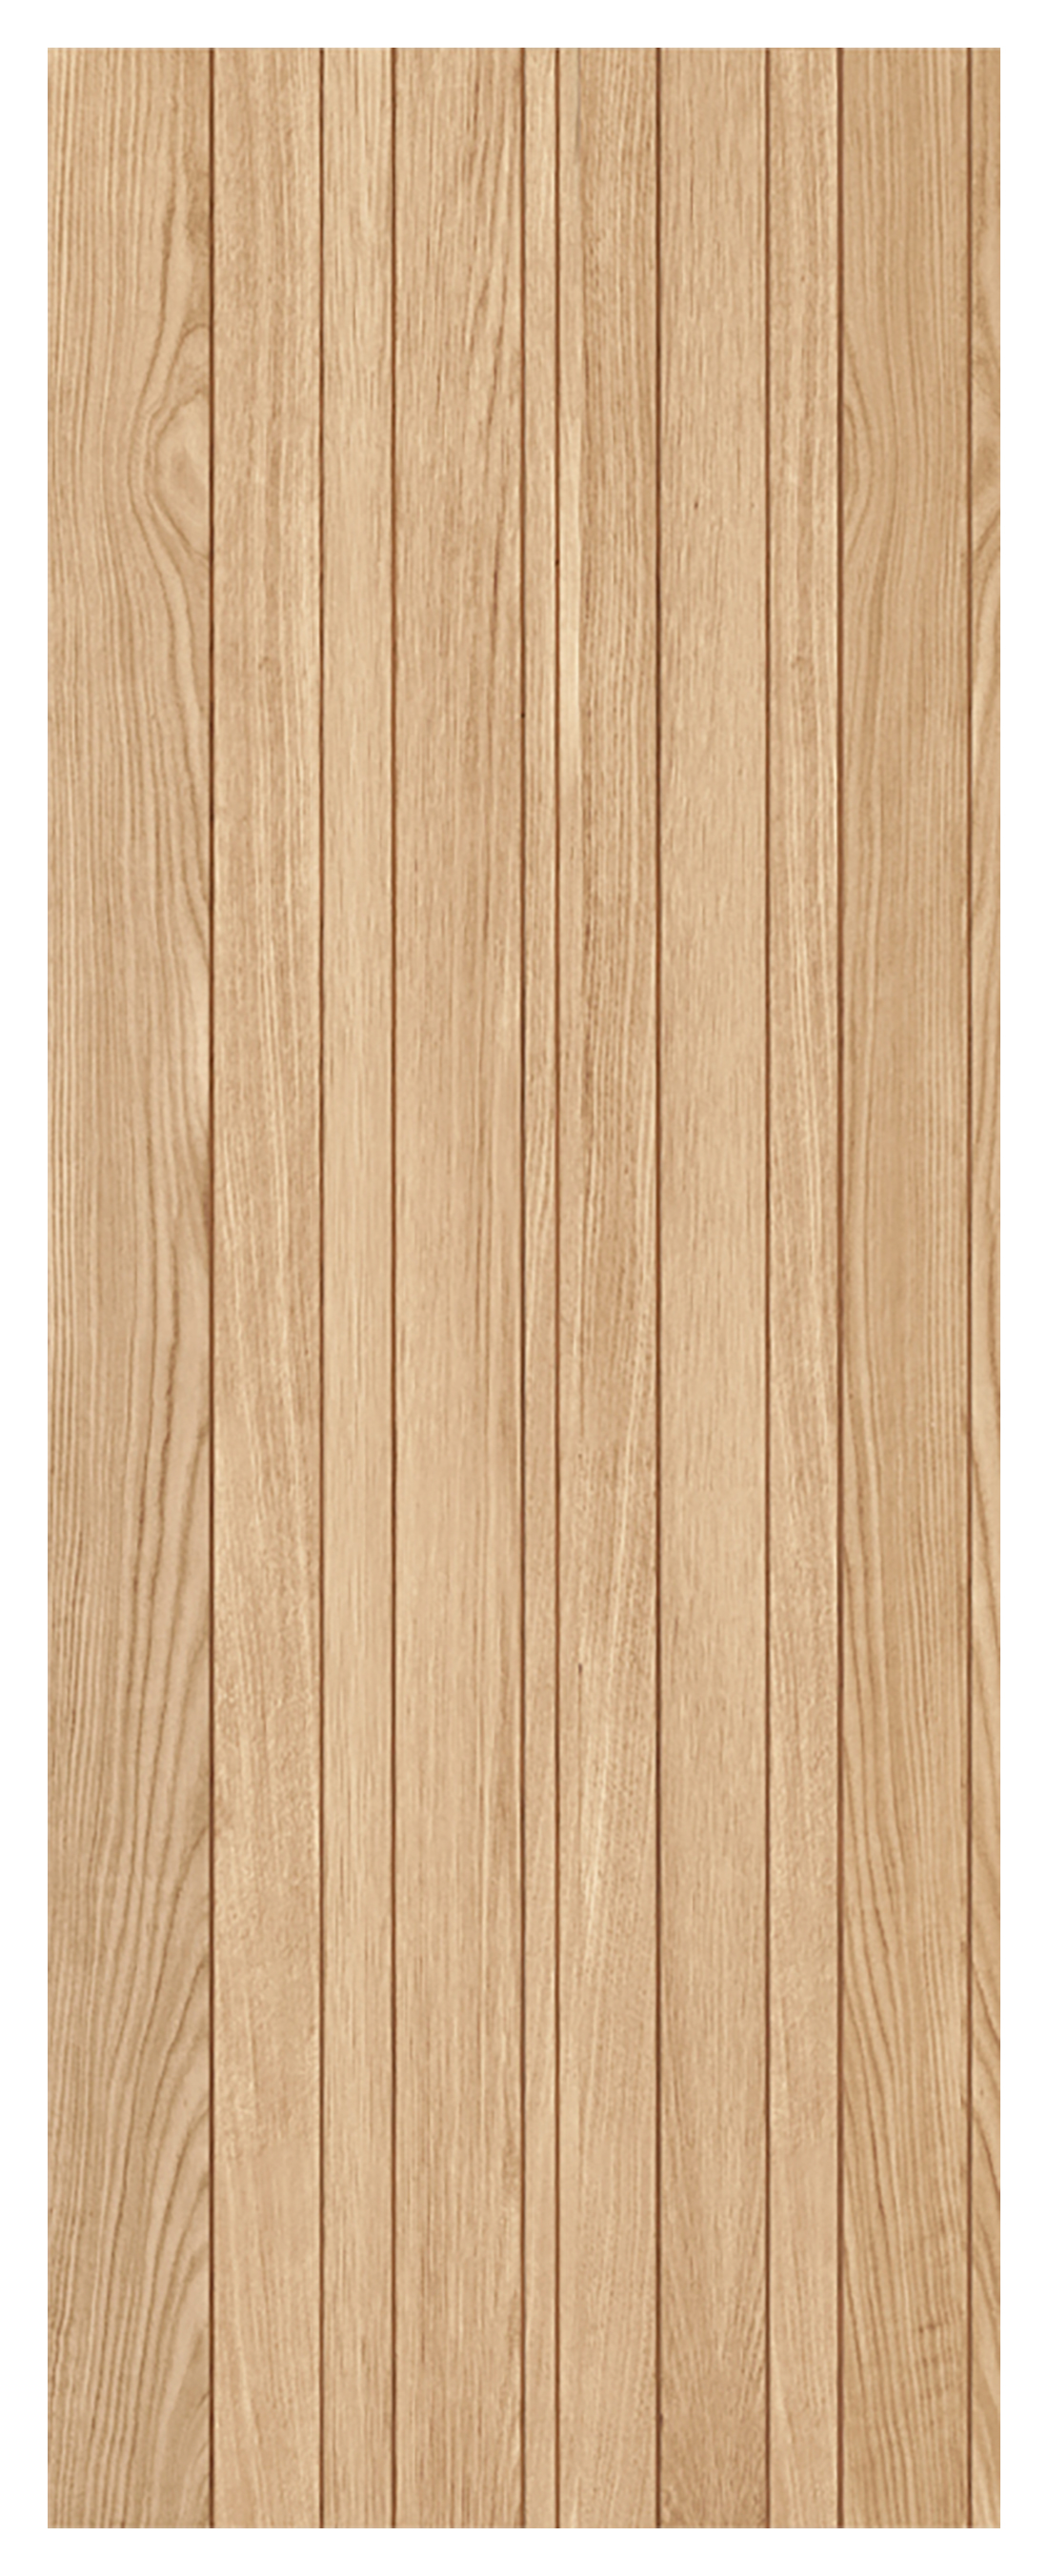 Image of LPD Internal Montreal Pre-Finished Oak Solid Core Door - 686 x 1981mm